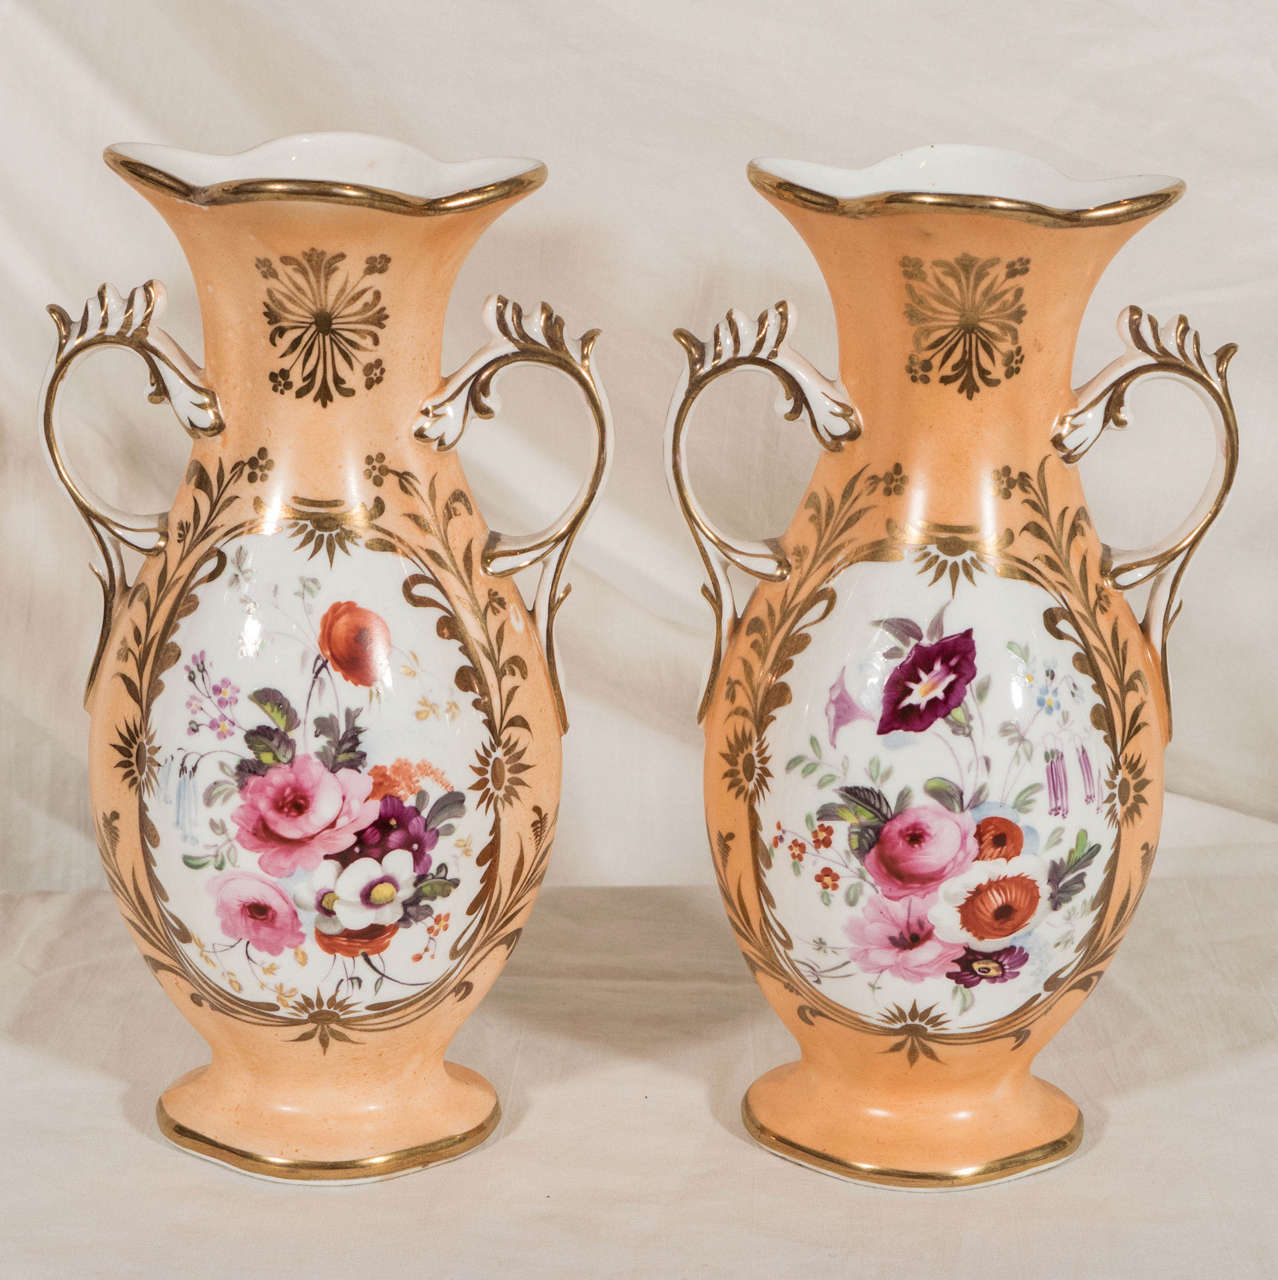 A lovely pair of Victorian bud vases delicately sculpted in an appealing shape. Painted in a soft peach tone, the centers decorated with colorful bouquets of flowers.